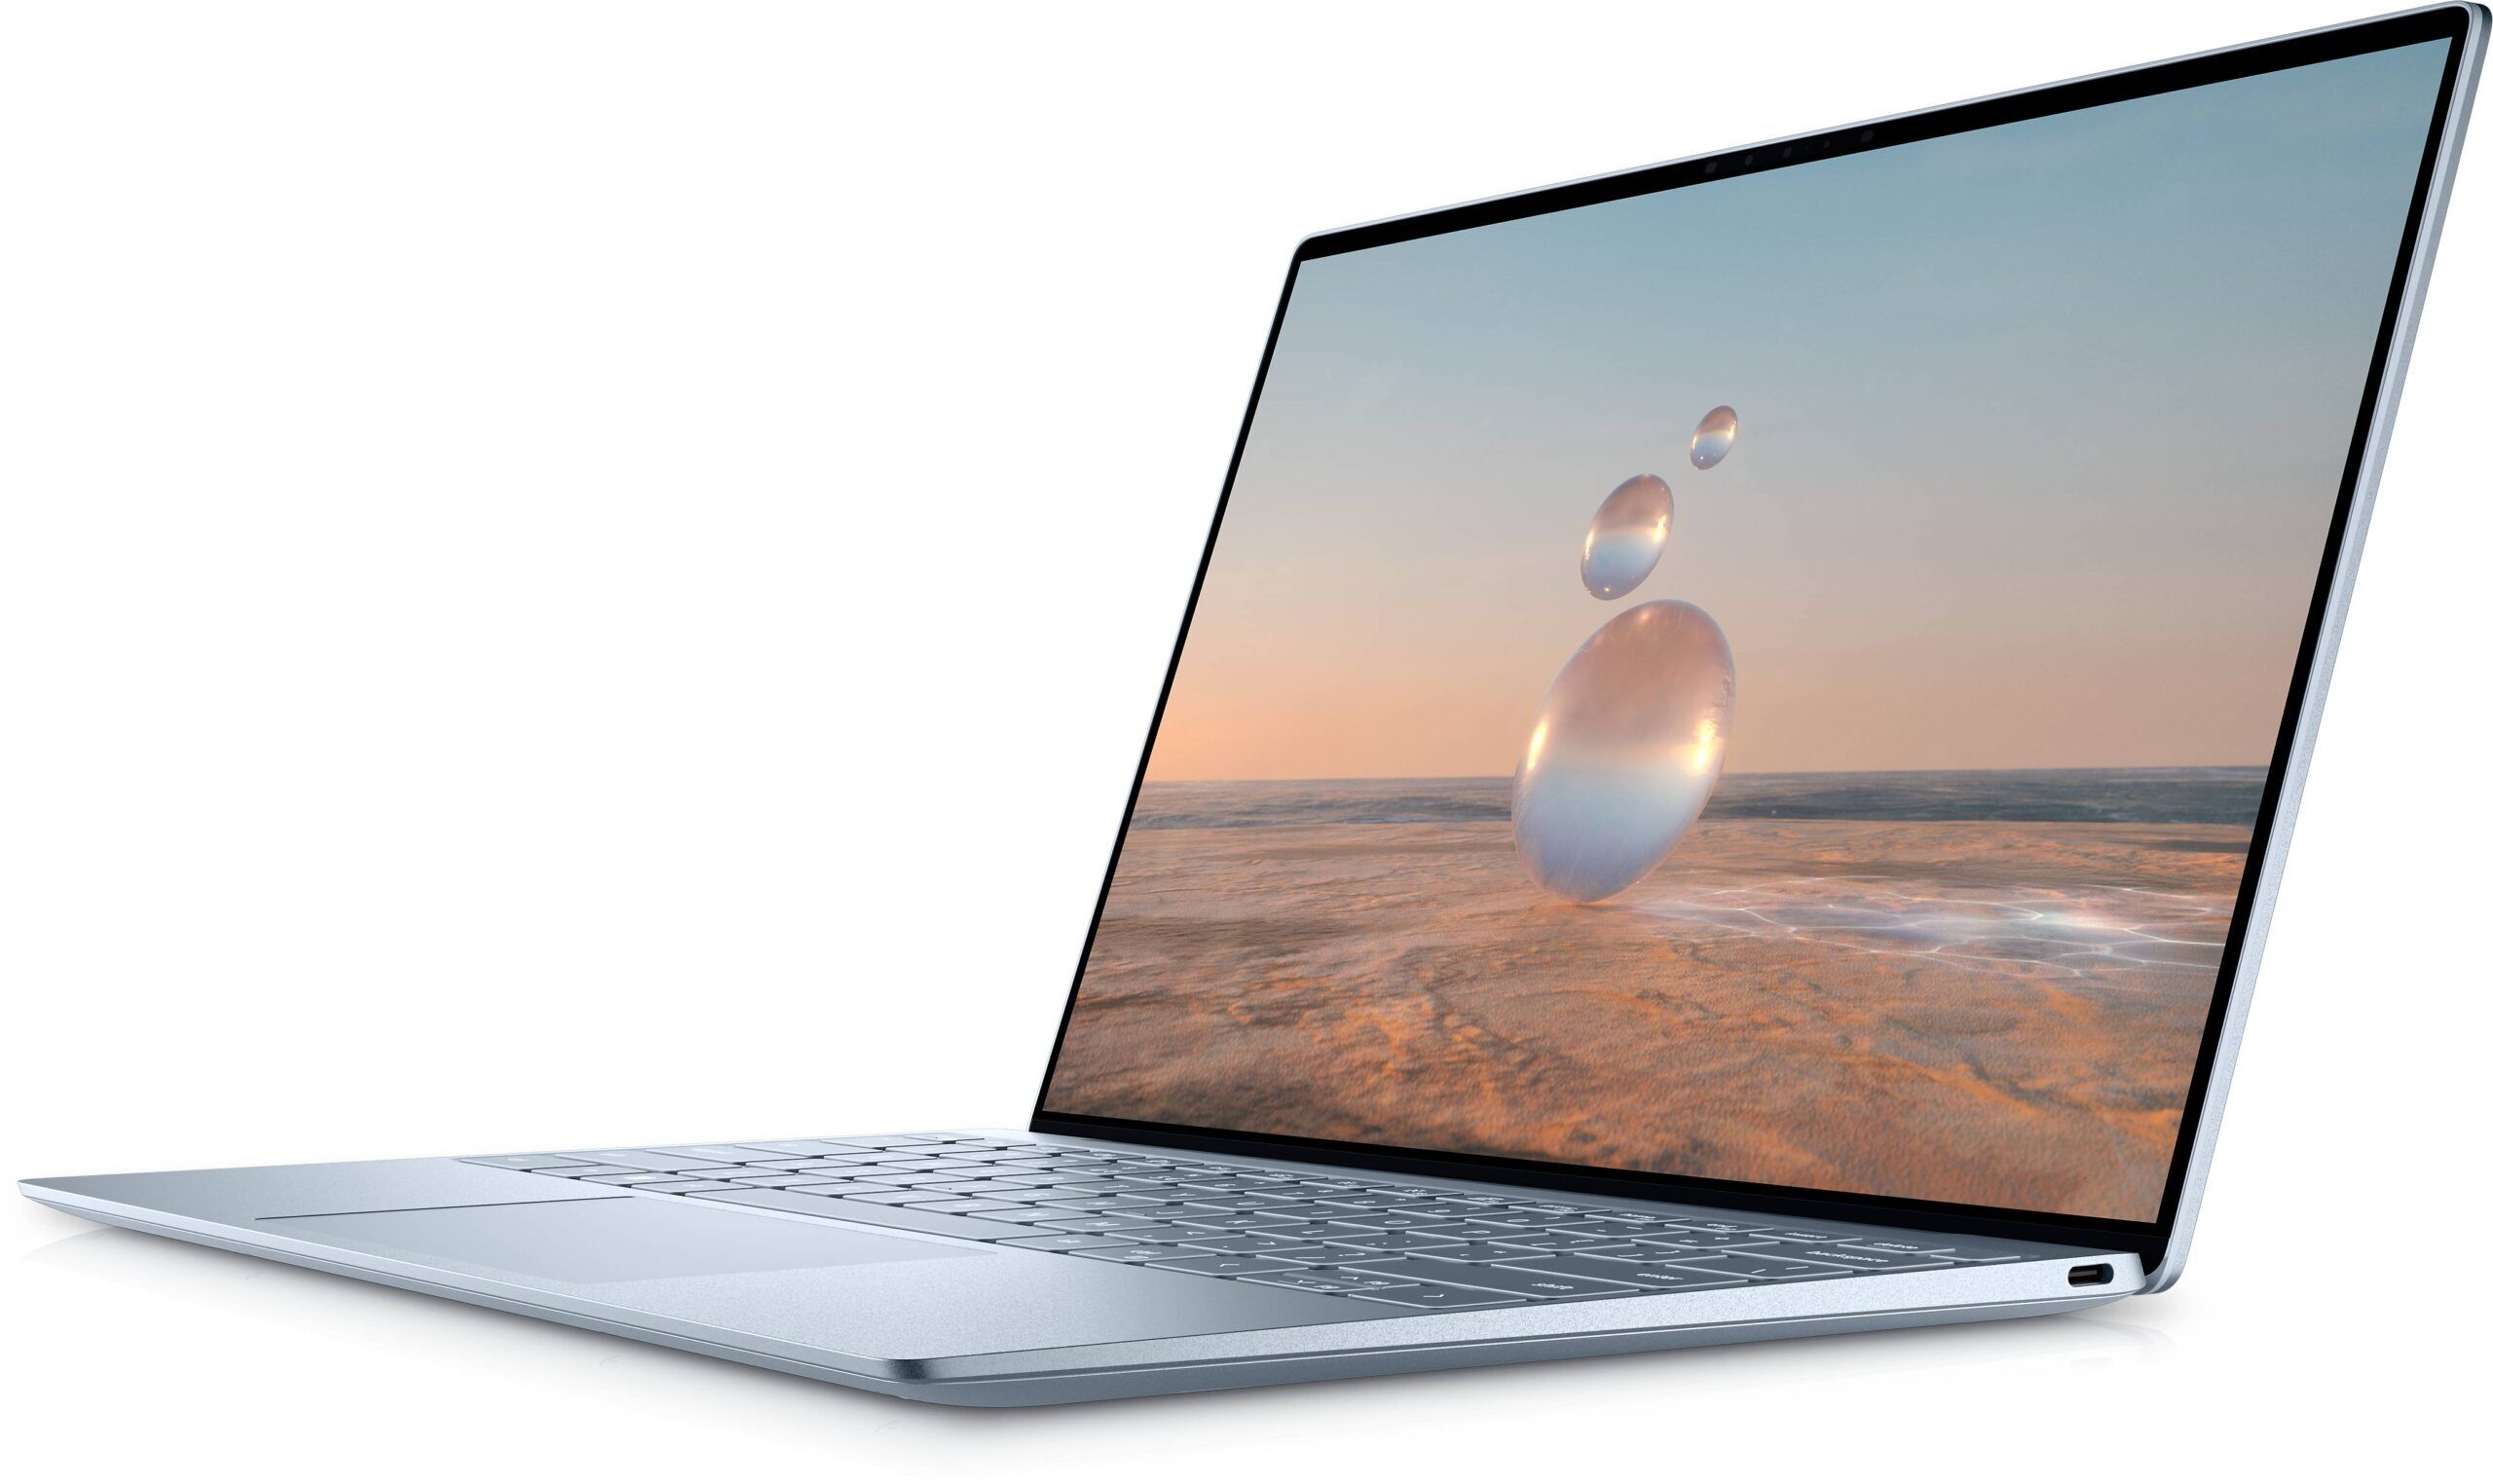 Dell announces new 2-in-1 XPS 13 and XPS 13 laptops